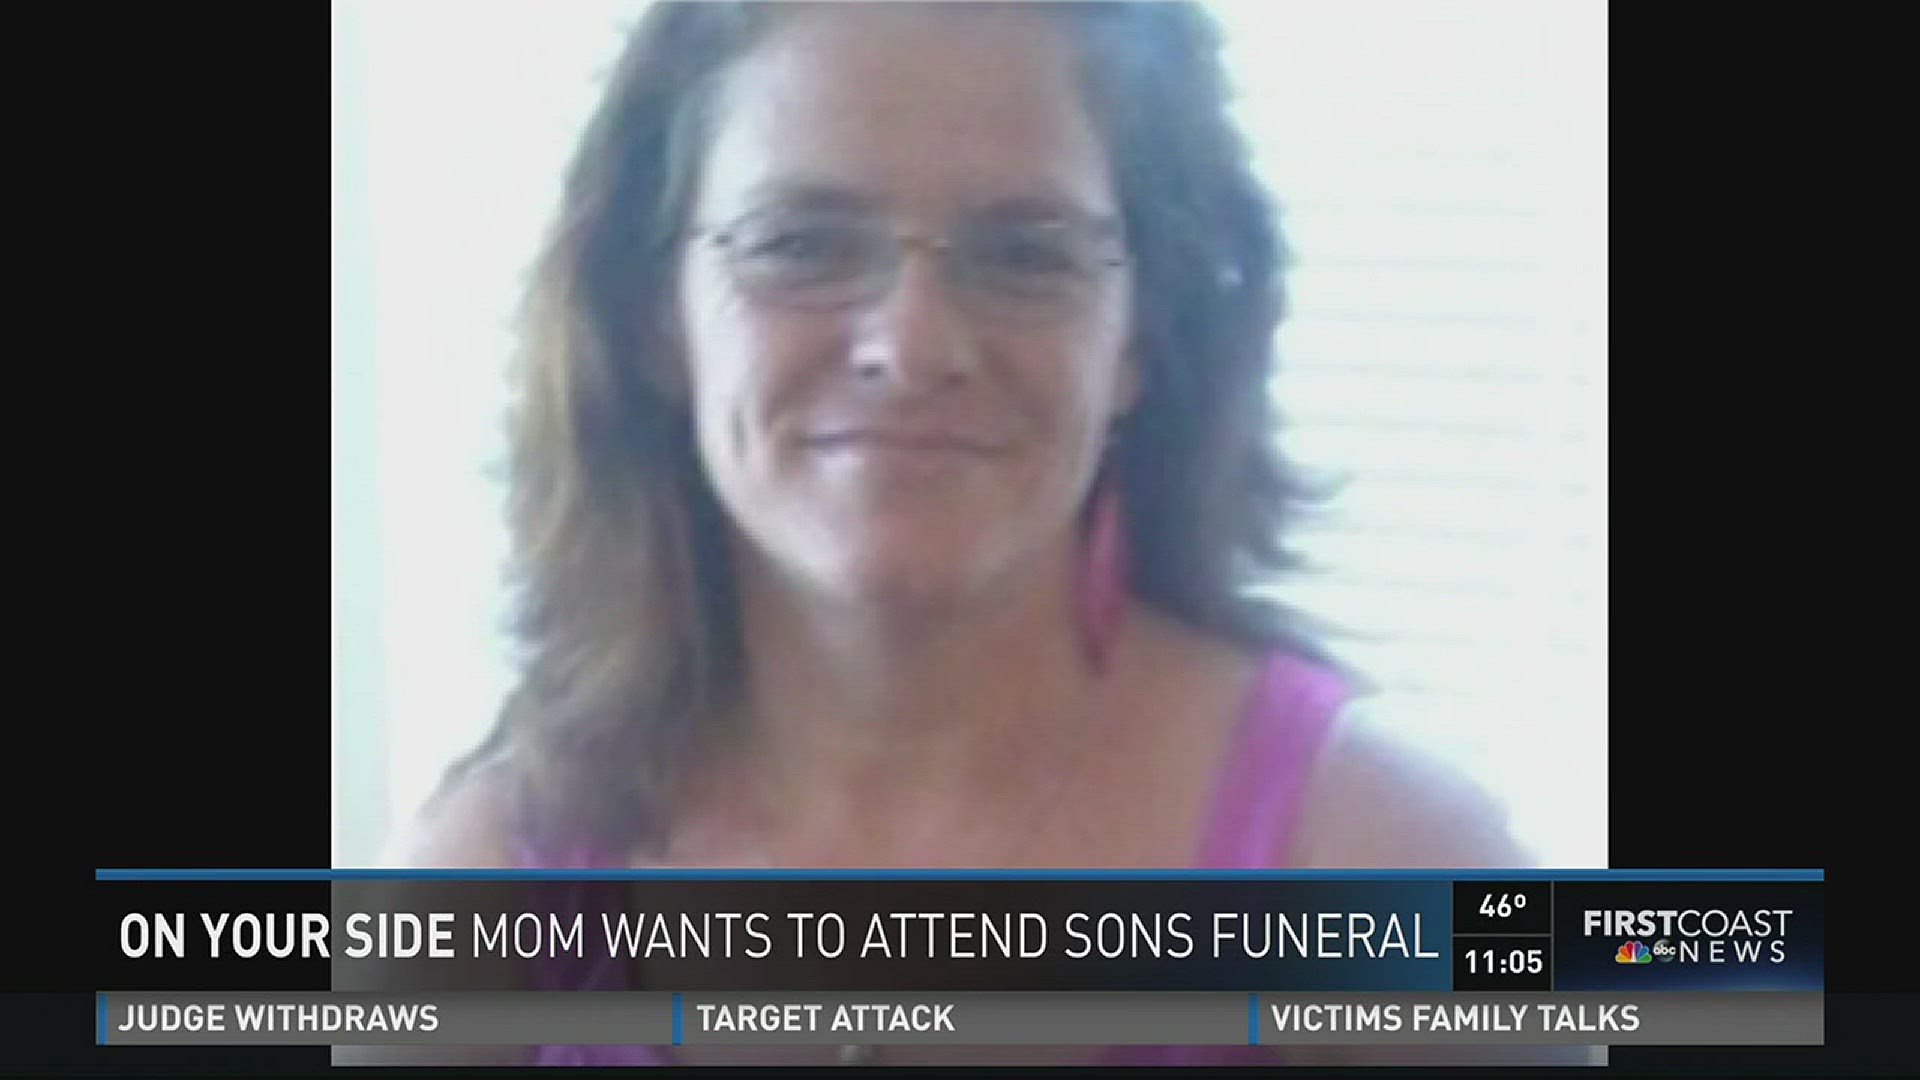 Mother unable to attend son's funeral